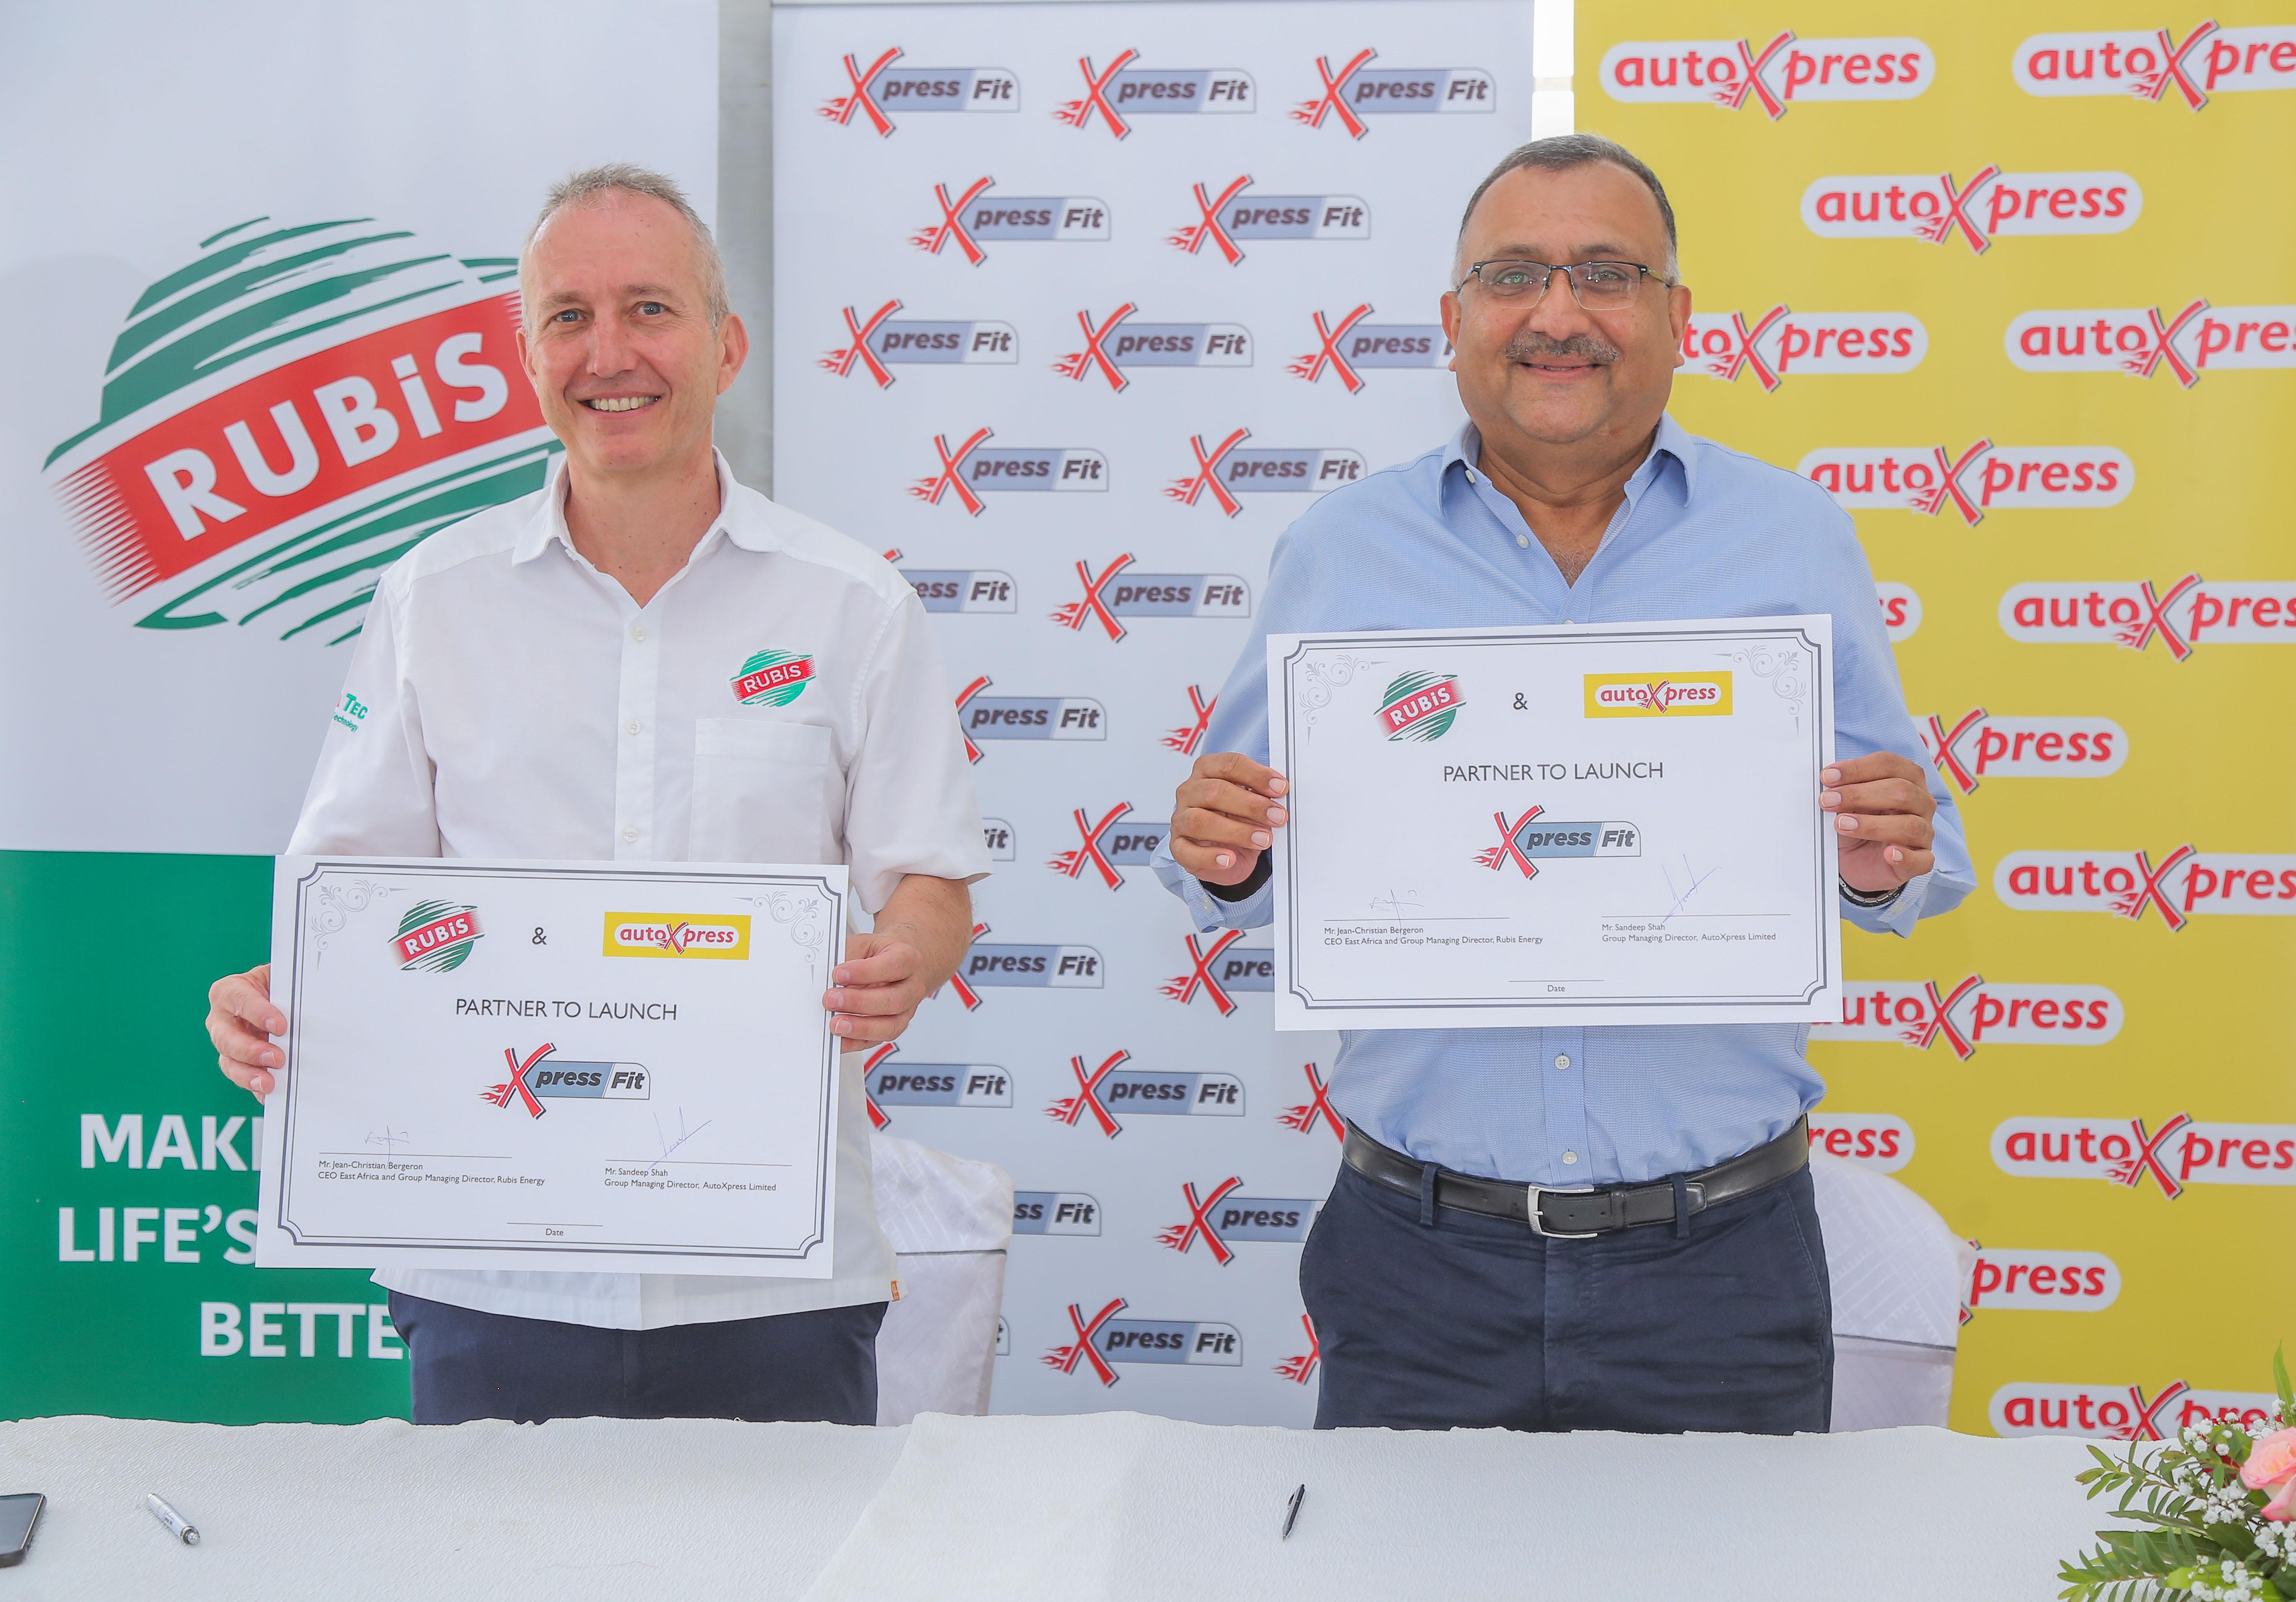 Jean-Christian Bergeron, CEO East Africa and Group Managing Director, Rubis Energy Kenya alongside Sandeep Shah, Group Managing Director, AutoXpress holding certificates showing their partnership for Xpress fit.